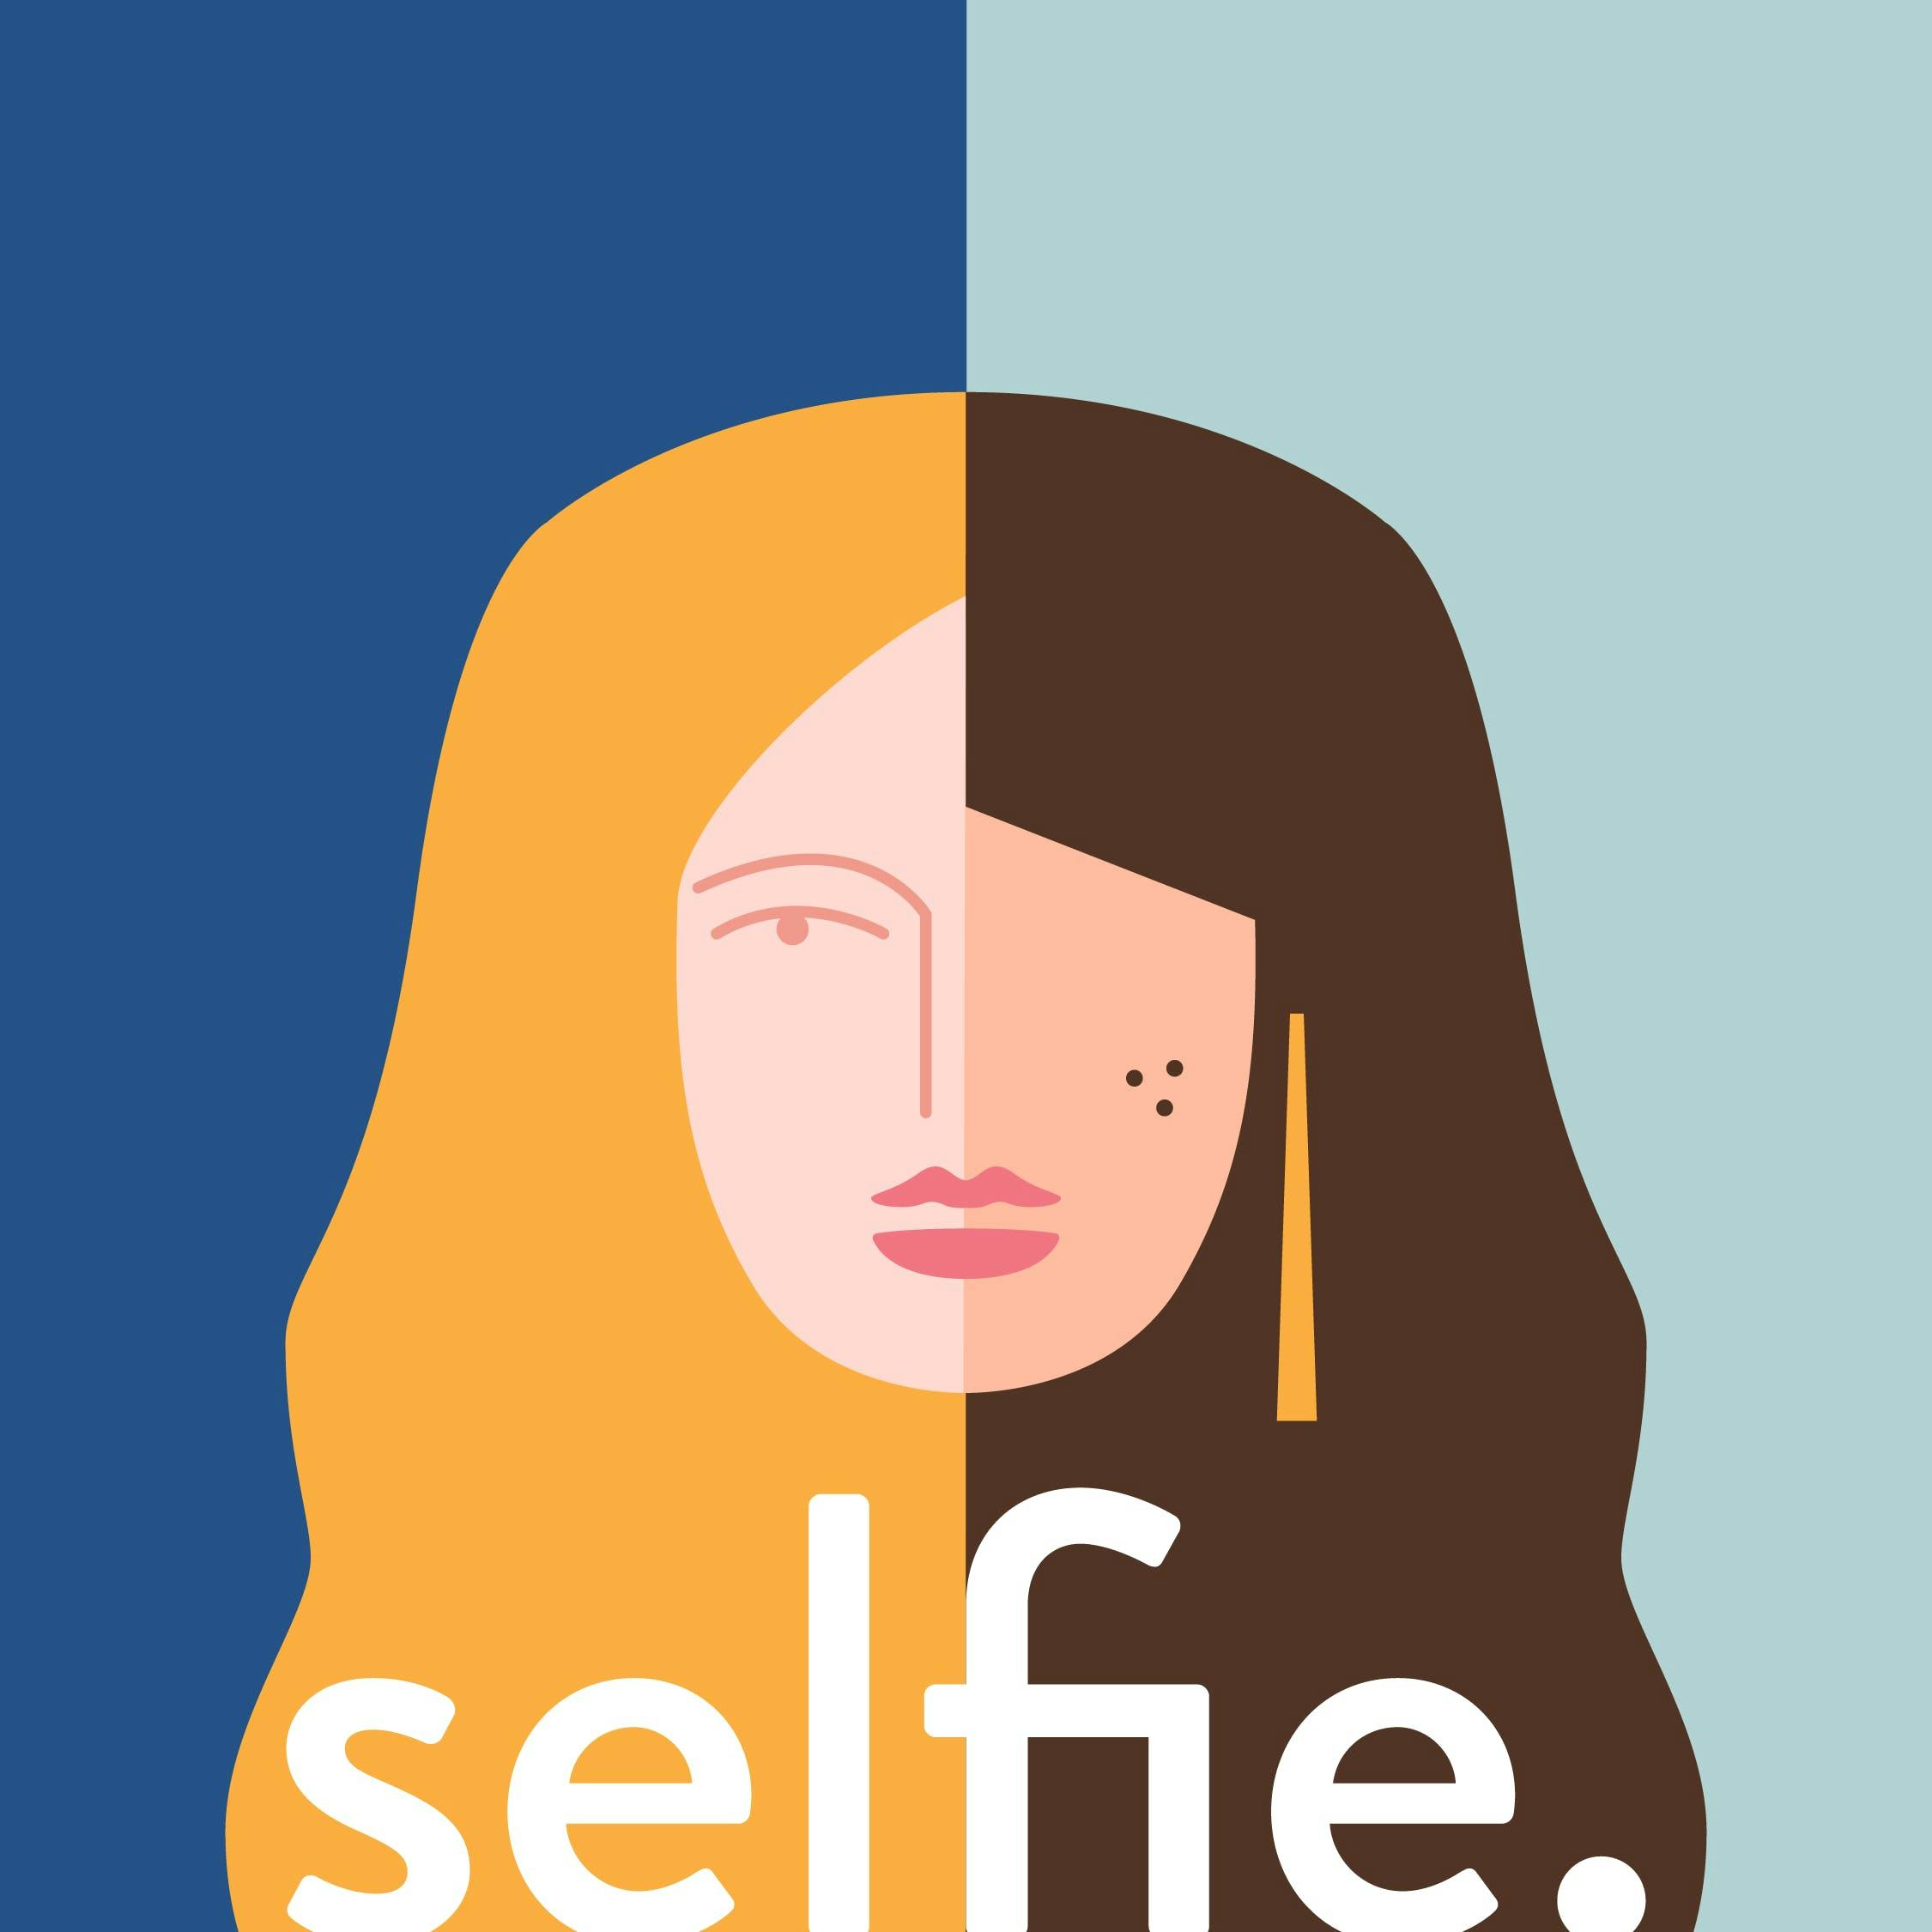 Enneagram type 1’s, and botox, should you do it? | Selfie Podcast Episode 11